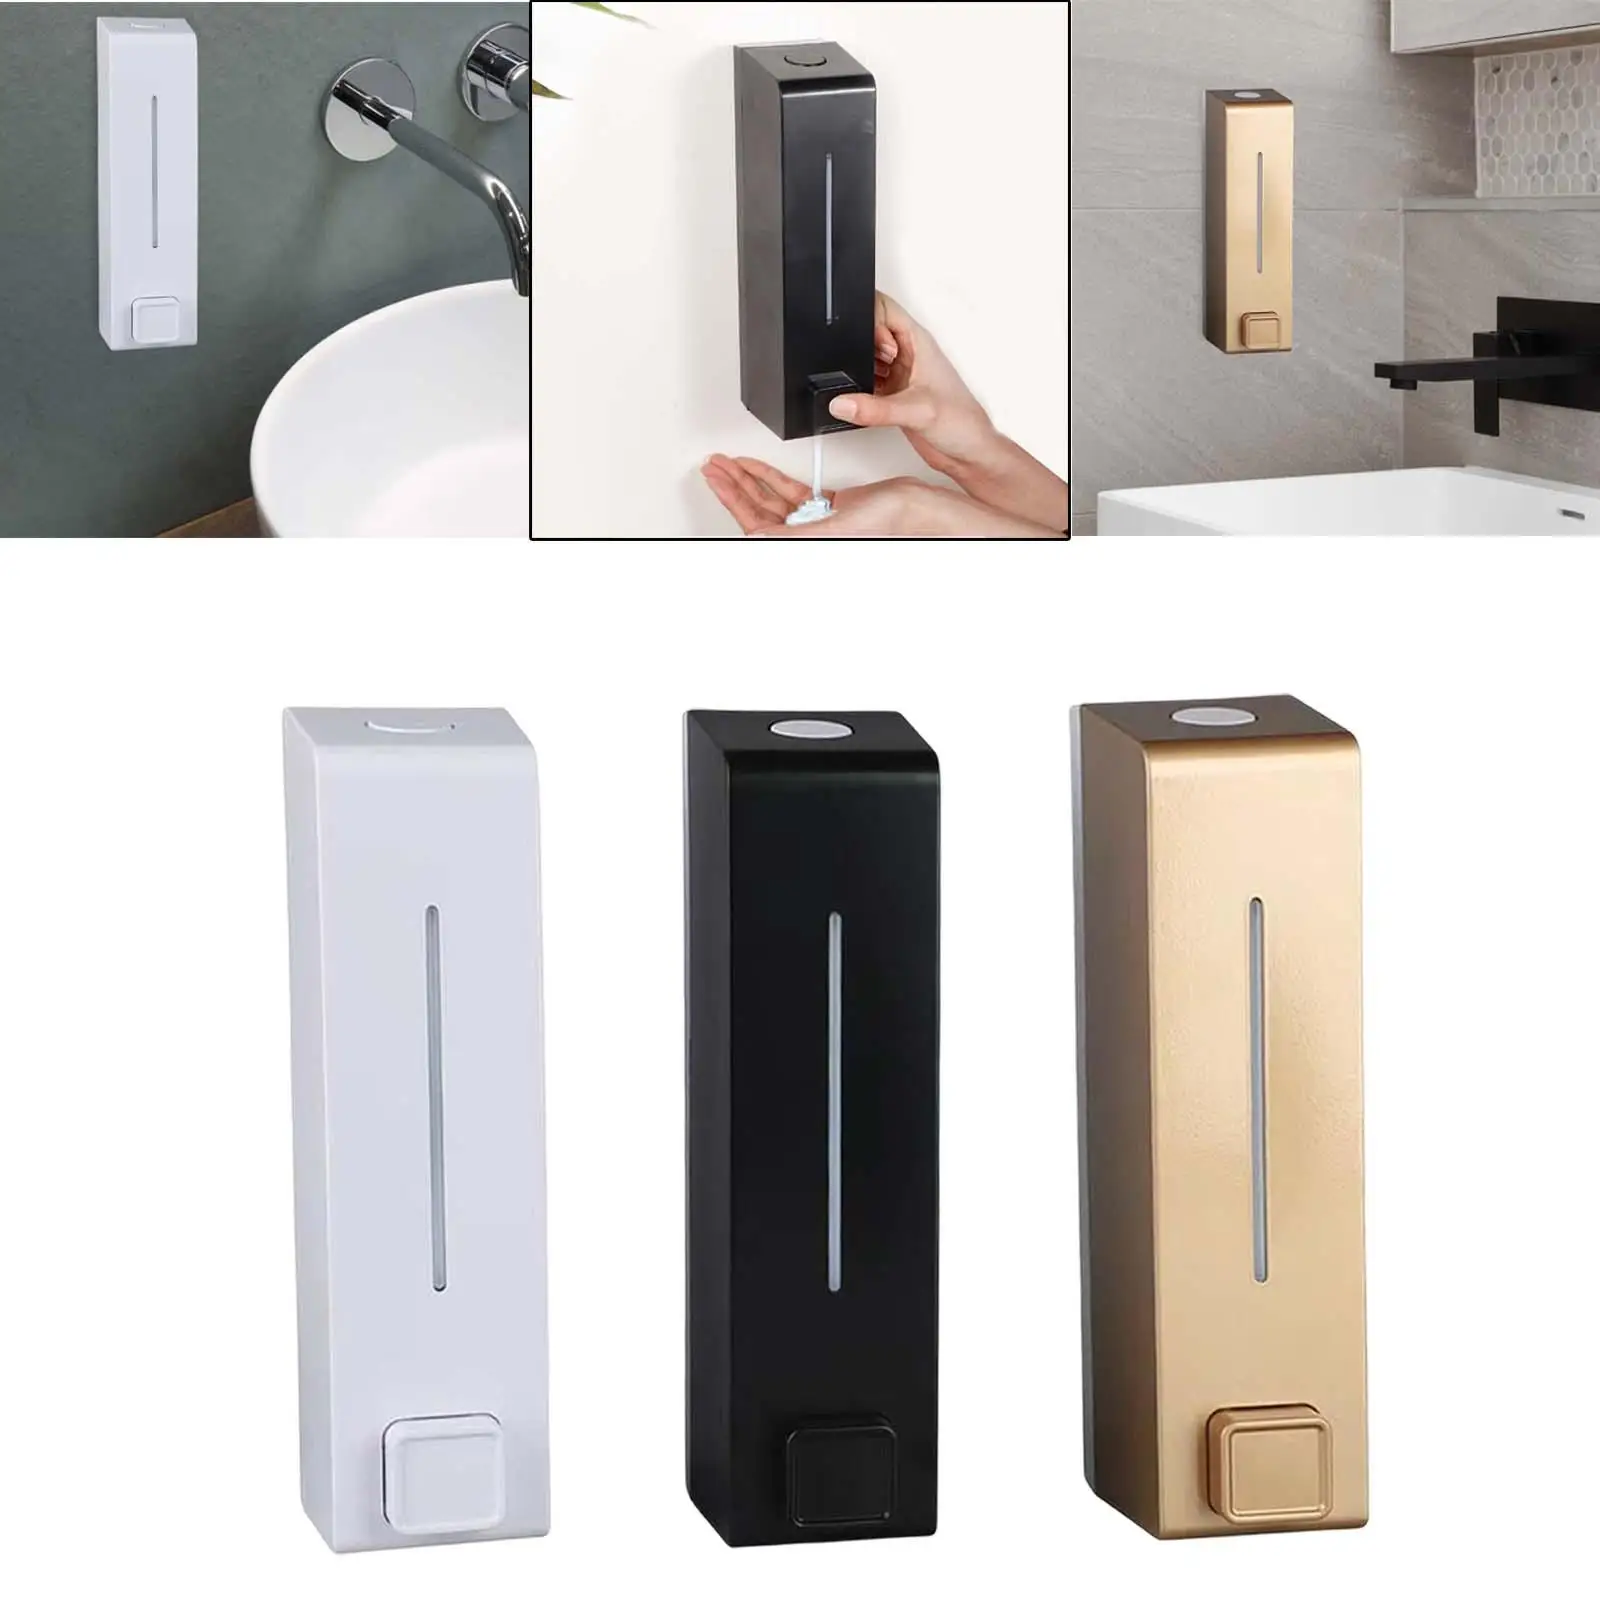 Manual Soap Dispenser, Wall Mounted Shower Shampoo Hand Wash Soap Container Hand